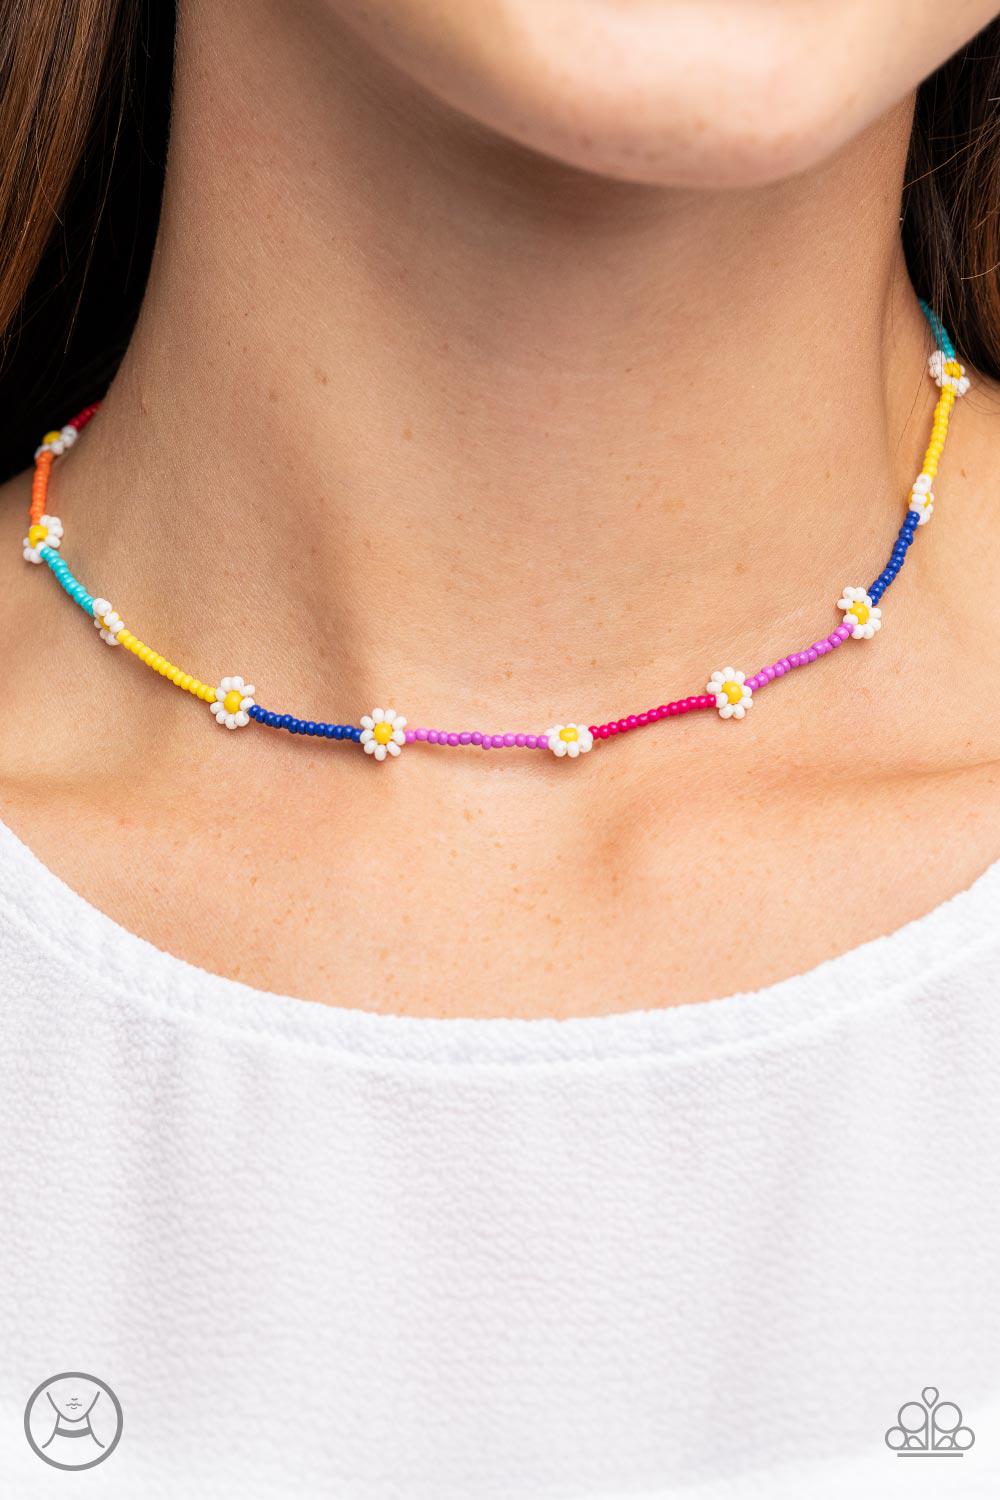 Colorfully Flower Child Multi Seed Bead Choker Necklace - Paparazzi Accessories-on model - CarasShop.com - $5 Jewelry by Cara Jewels